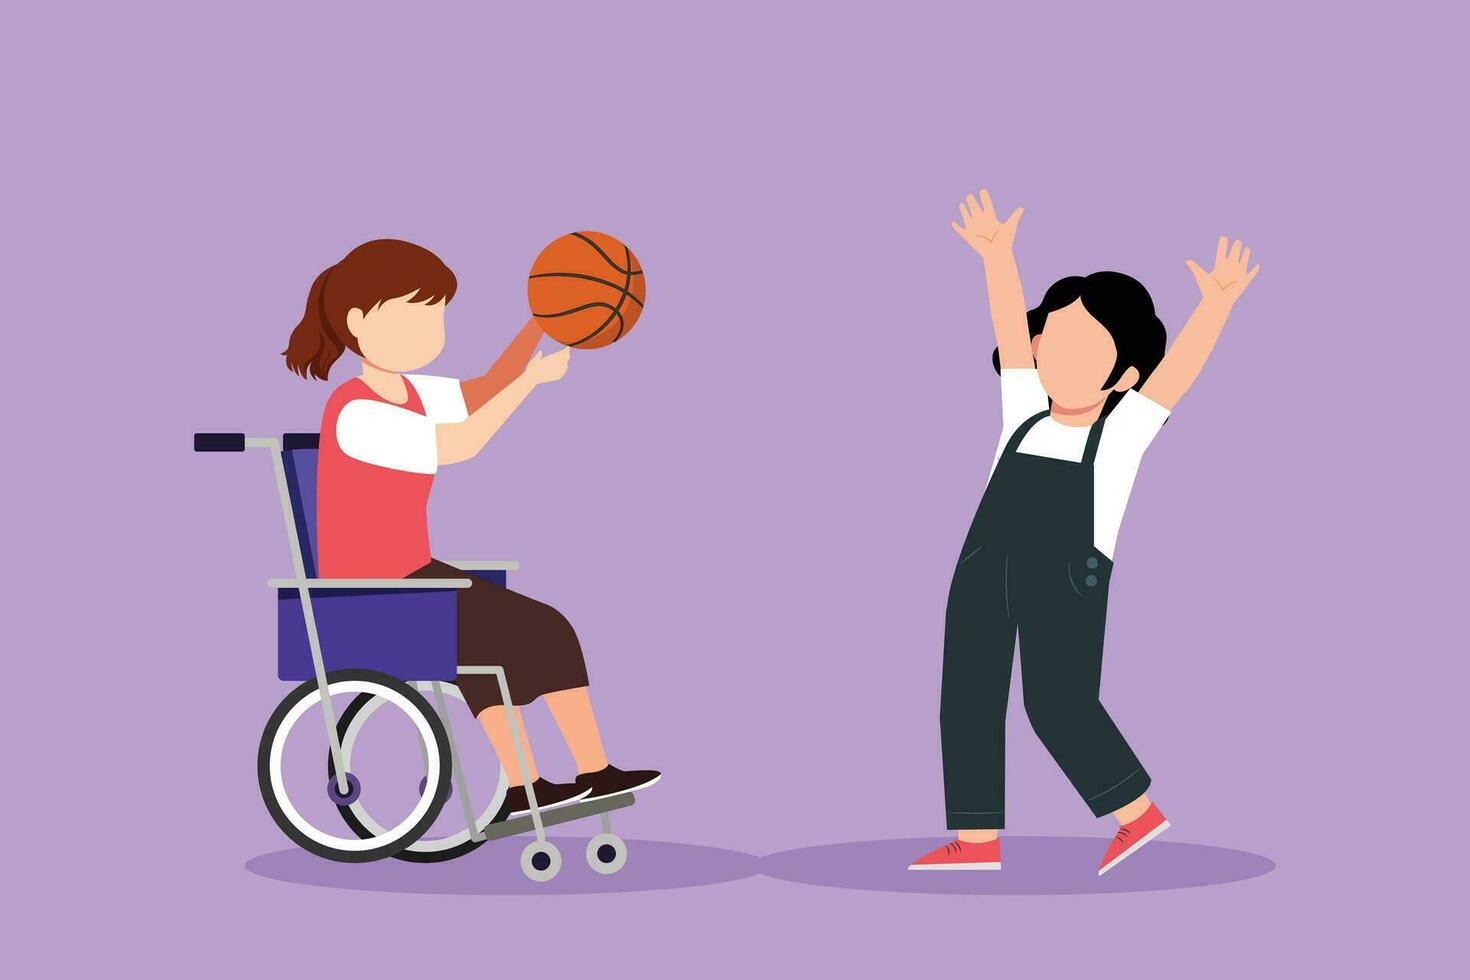 Cartoon flat style drawing of happy lifestyle of disabled people concept. Little girl in wheelchair playing ball with female friend outdoors living active lifestyle. Graphic design vector illustration